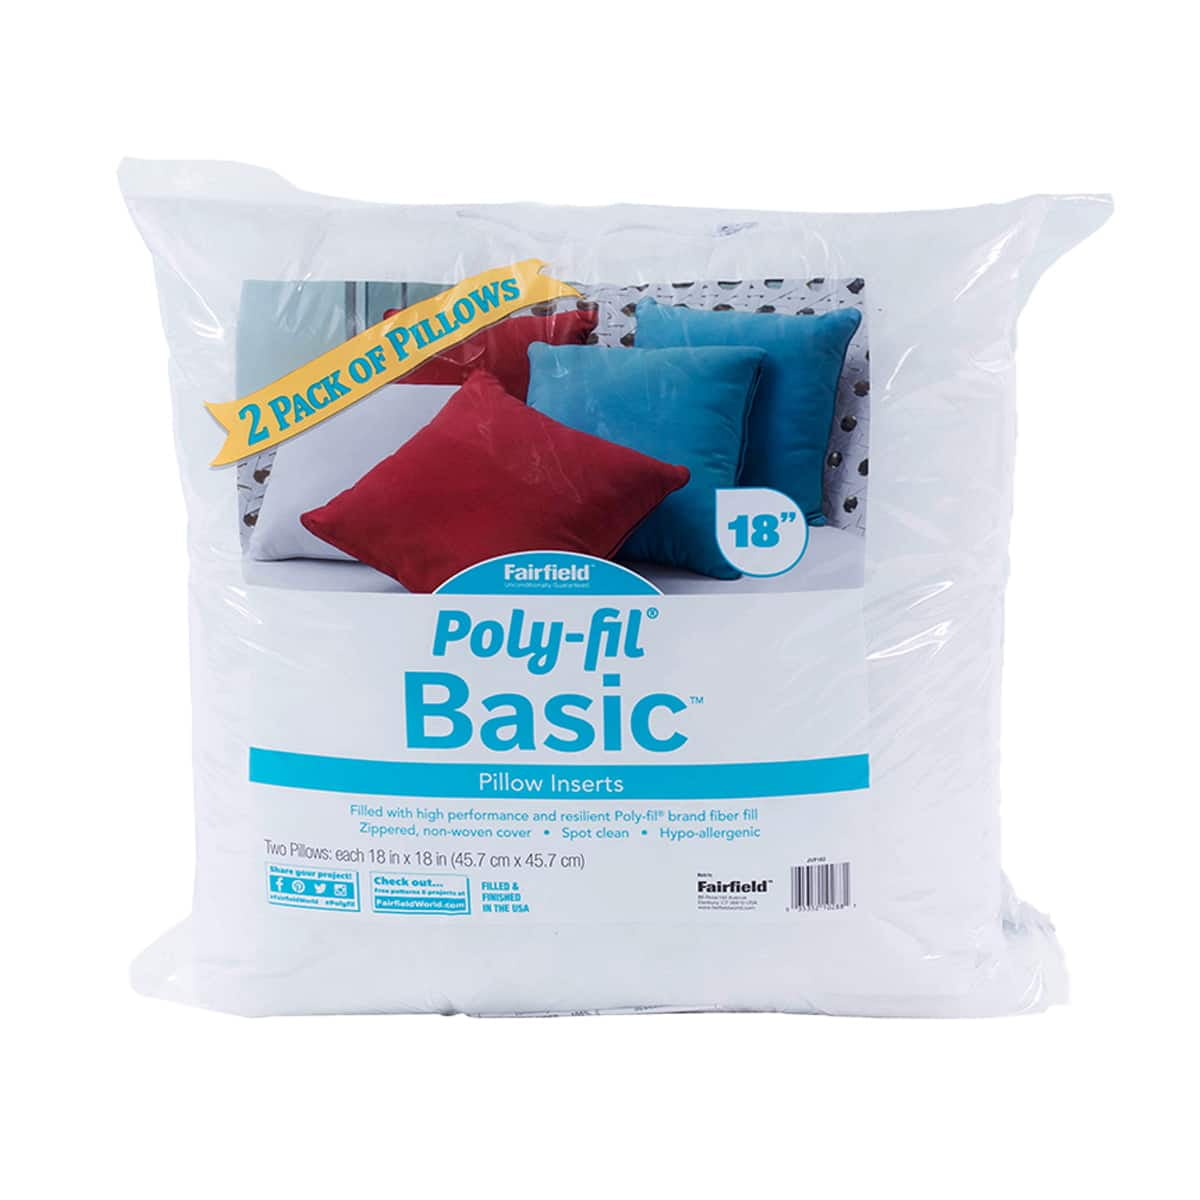 Soft Touch PolyFIL 12 x 16 Pillow Form - WoolyLady